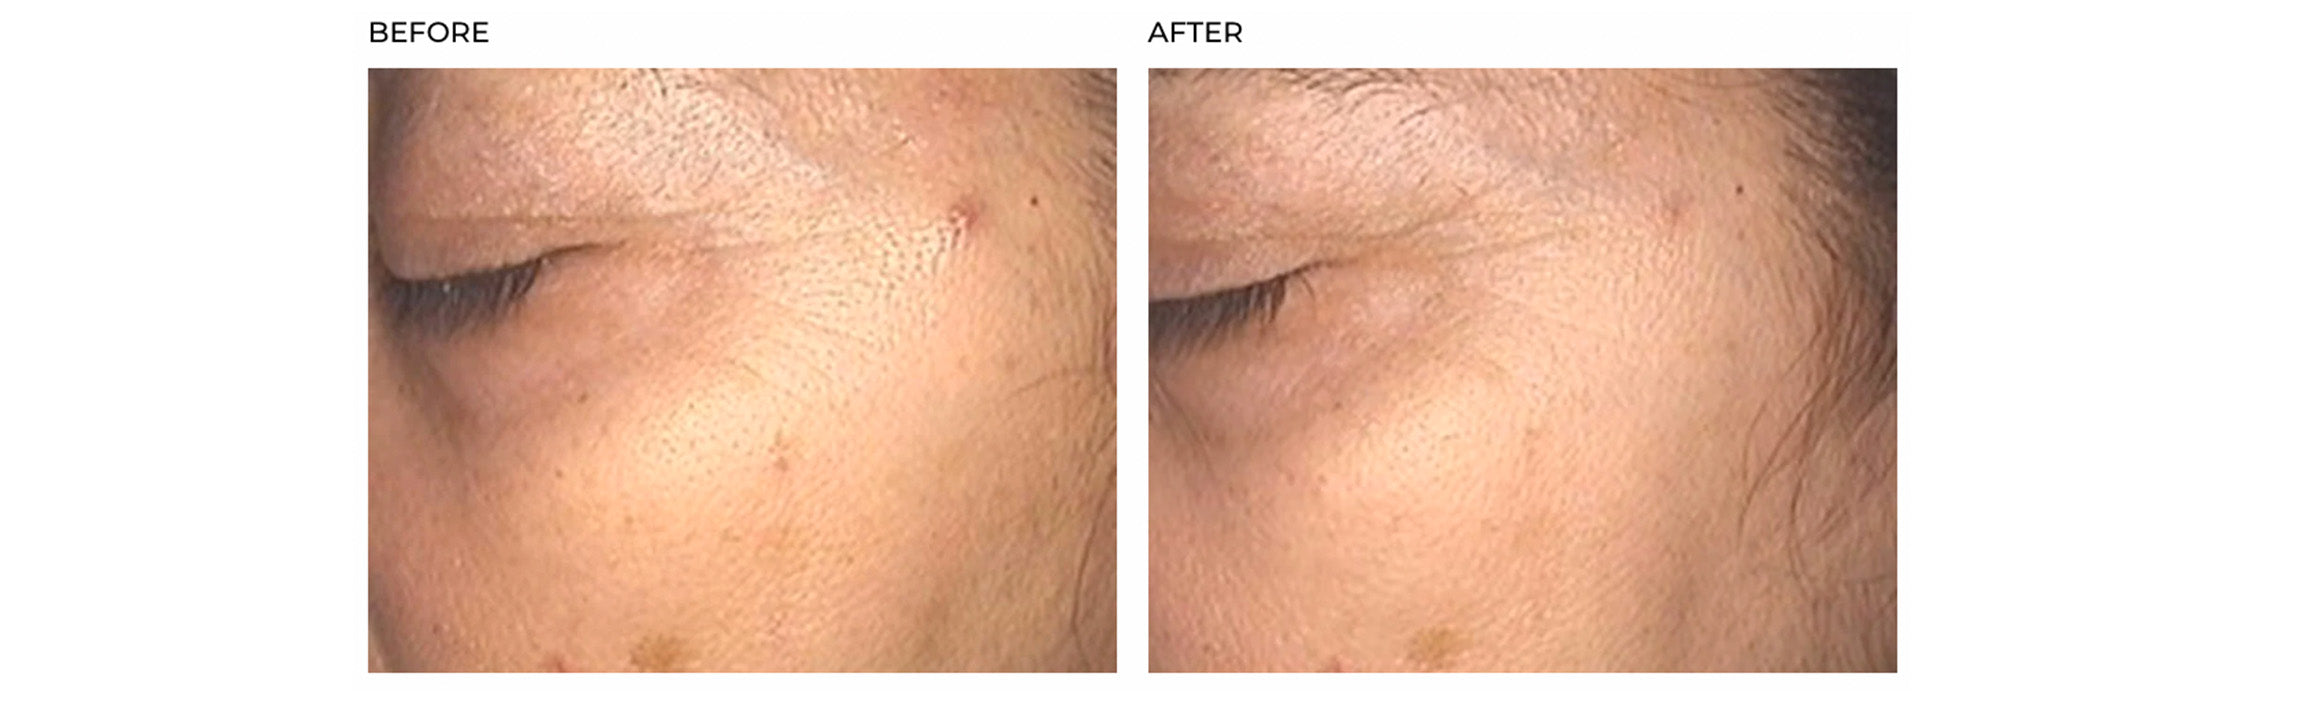 Hush & Hush SkinCapsule Brighten+ results before & after 3